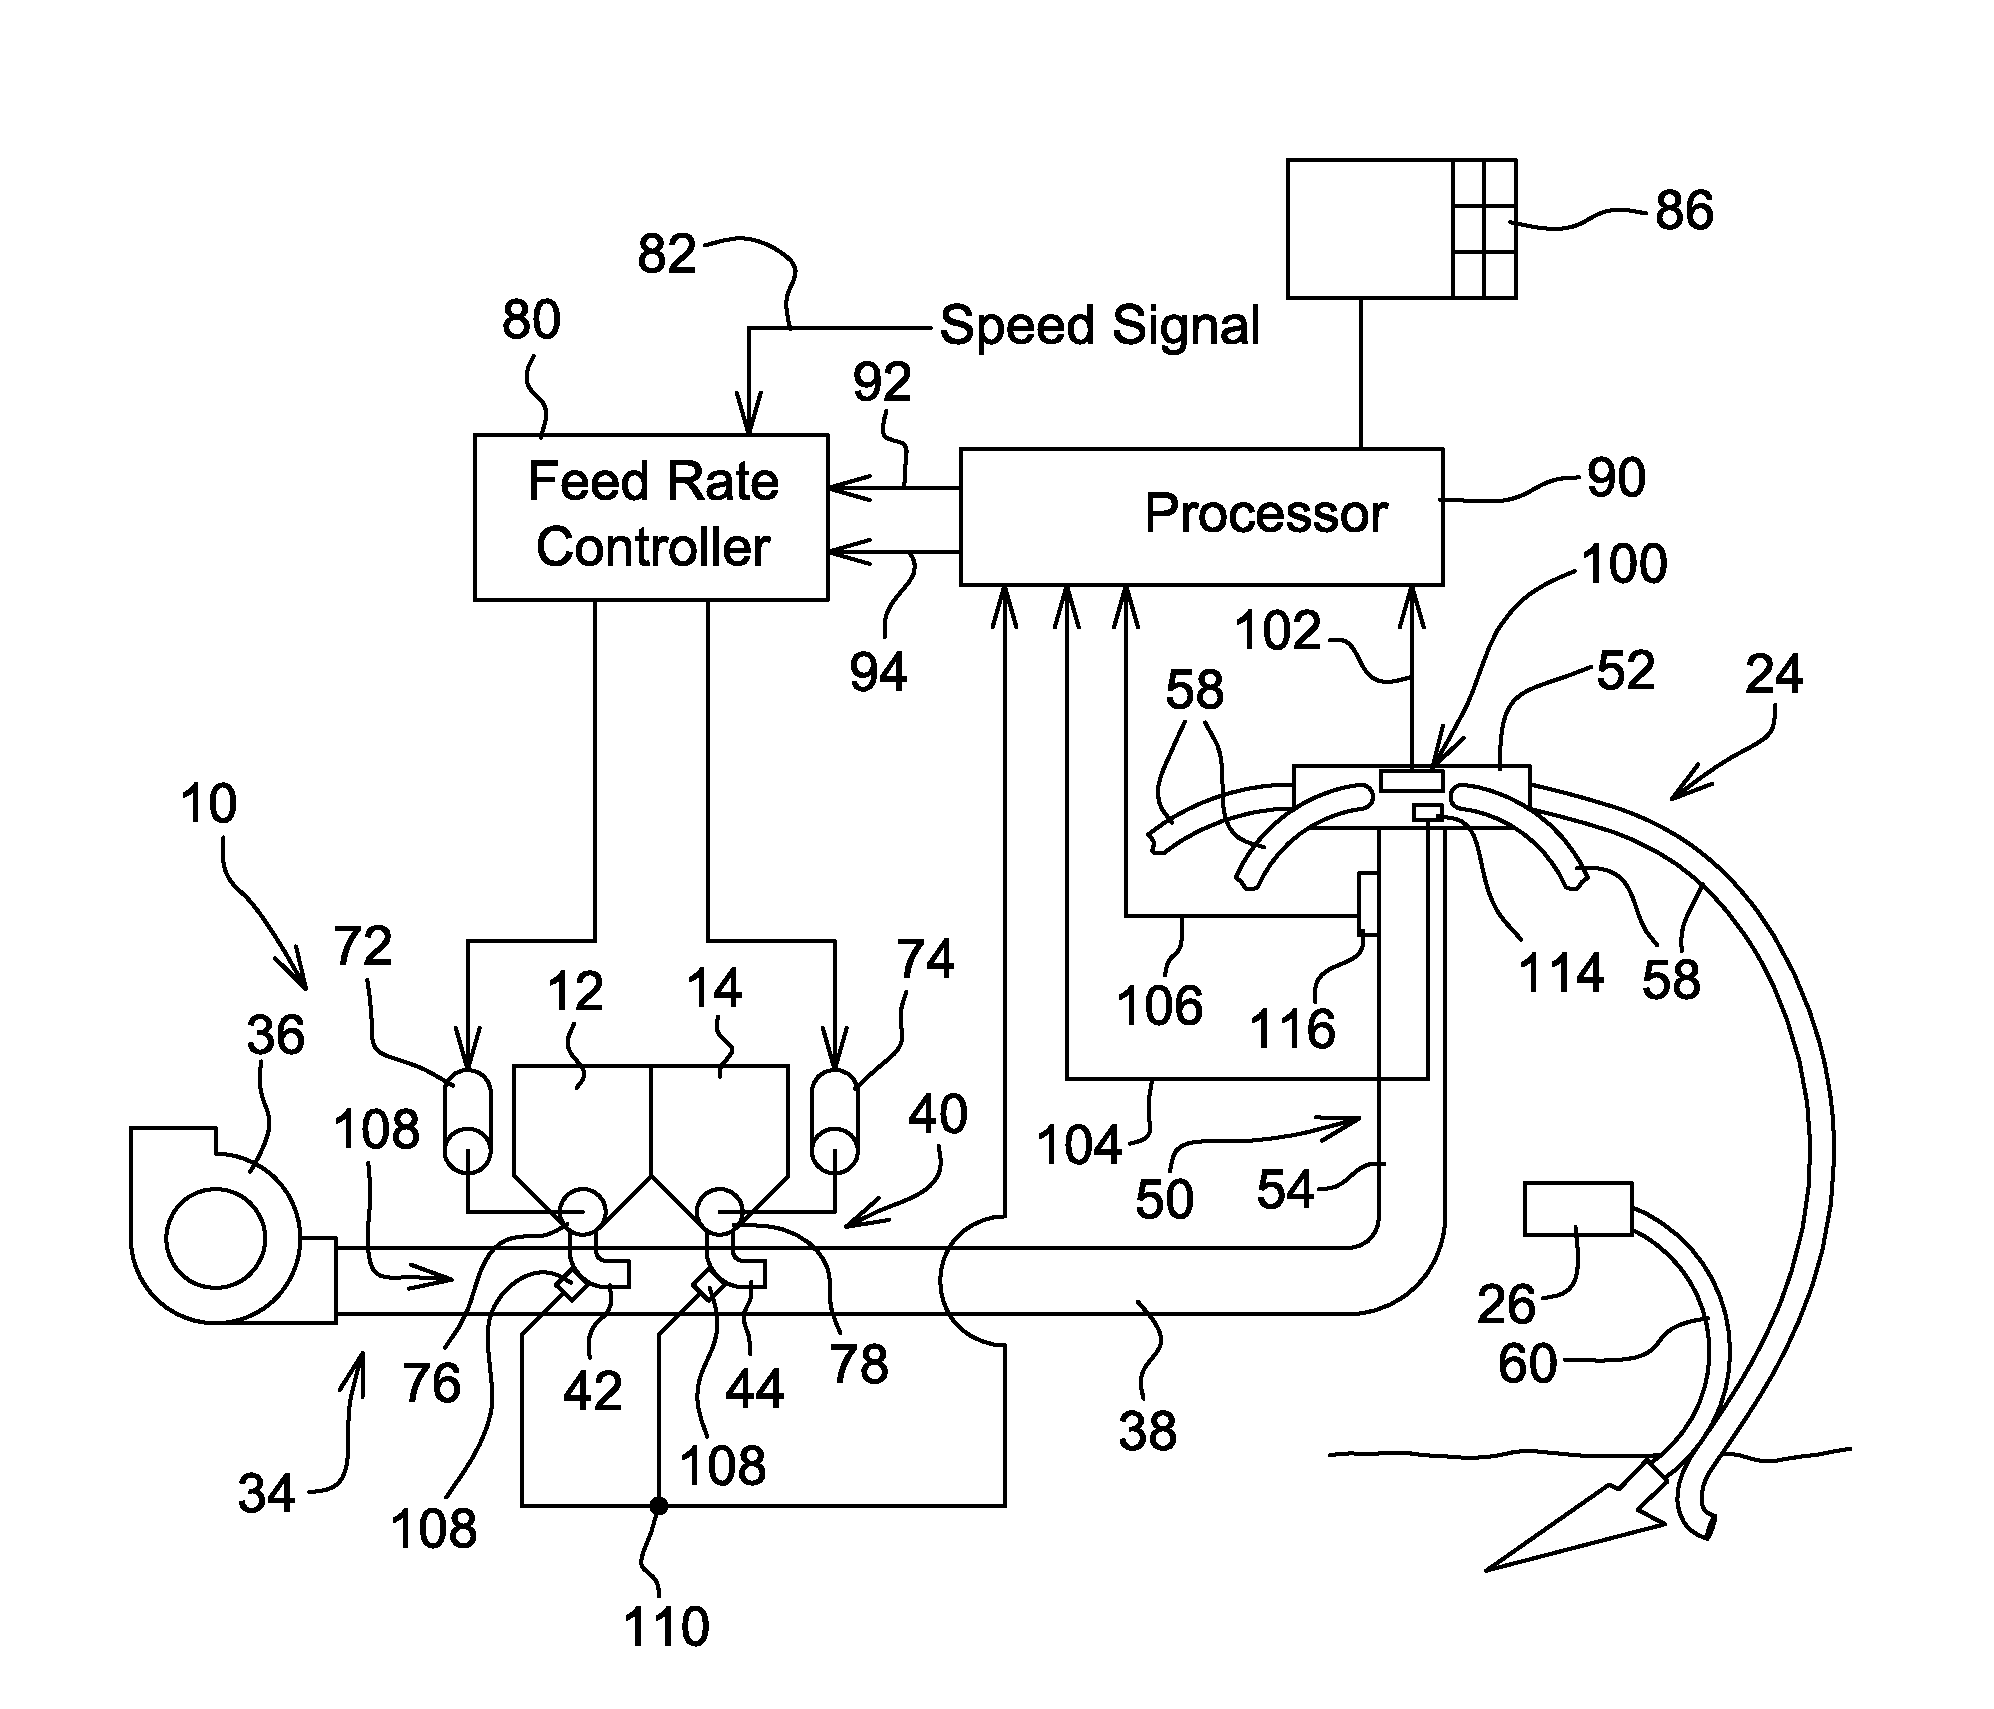 Particulate flow sensing for an agricultural implement